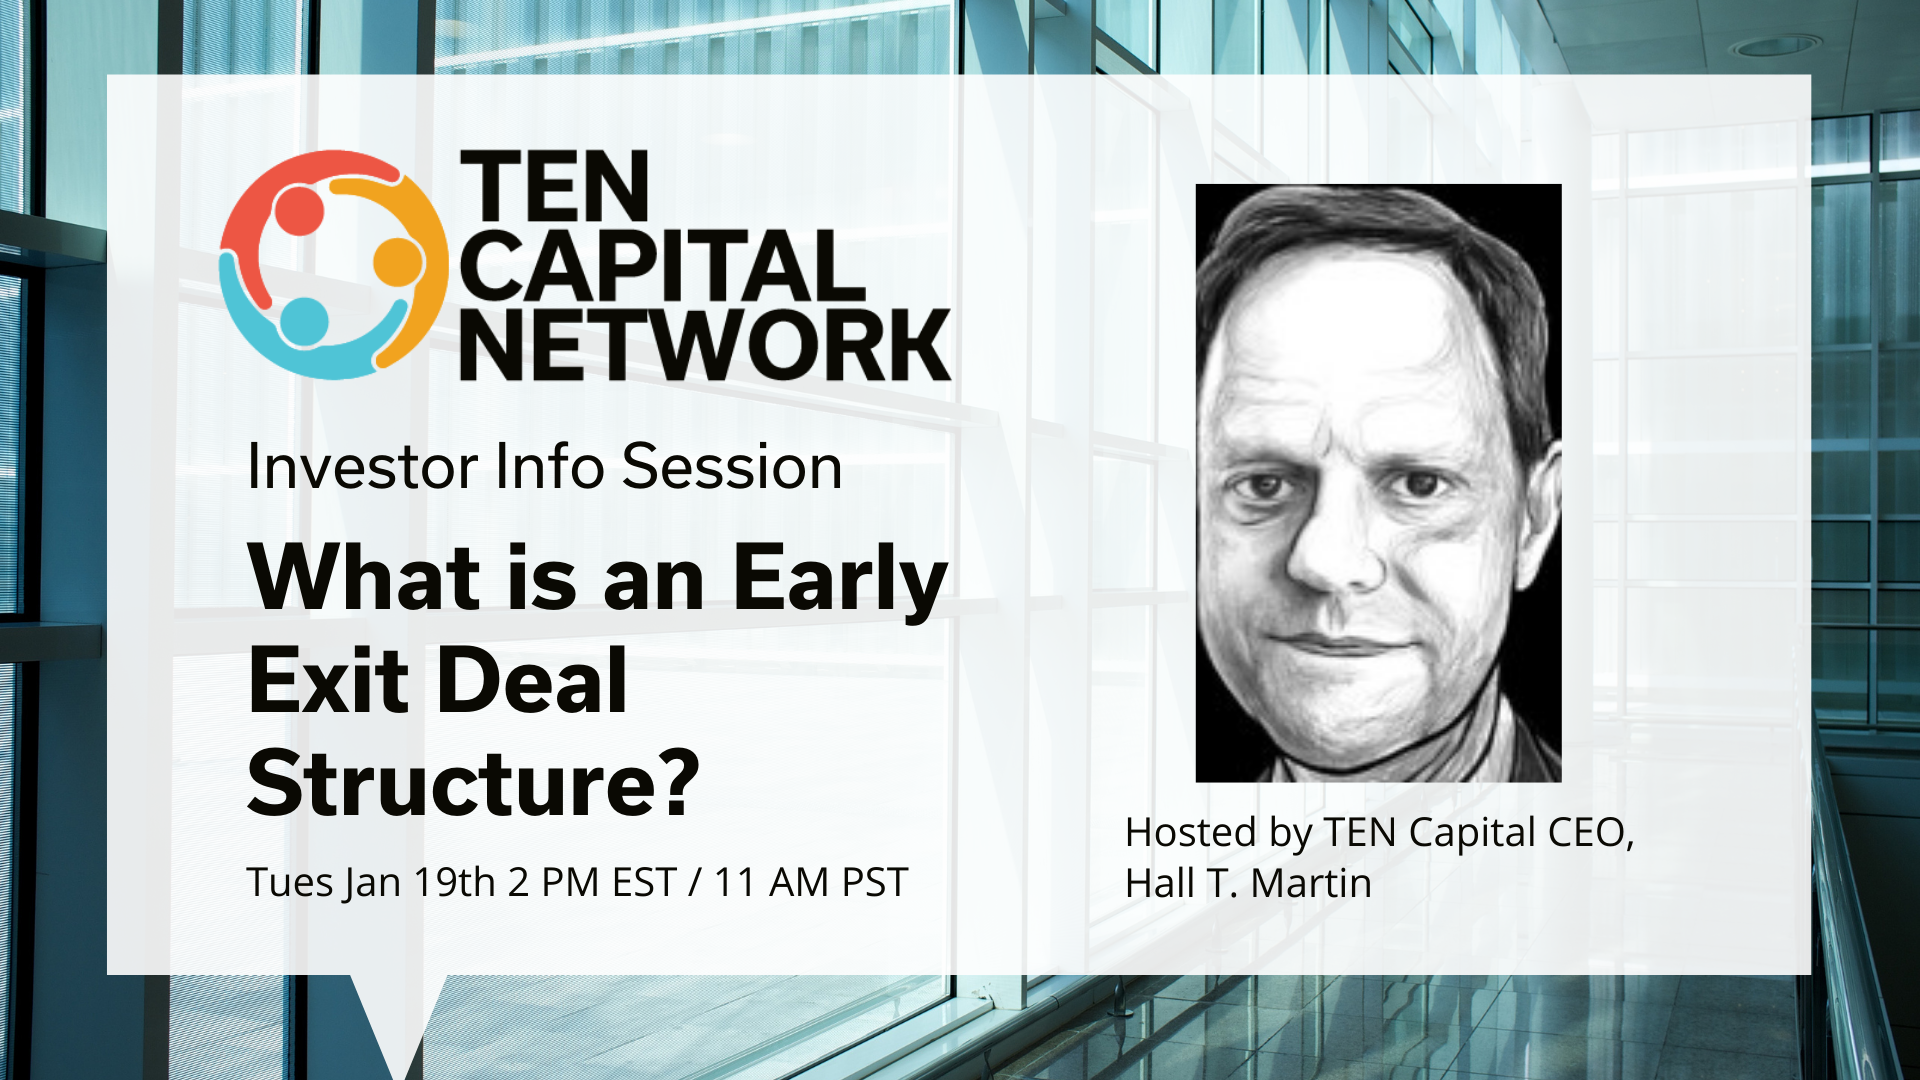 TEN Capital Presents: Investor Info Session - What is an Early Exit Deal Structure?